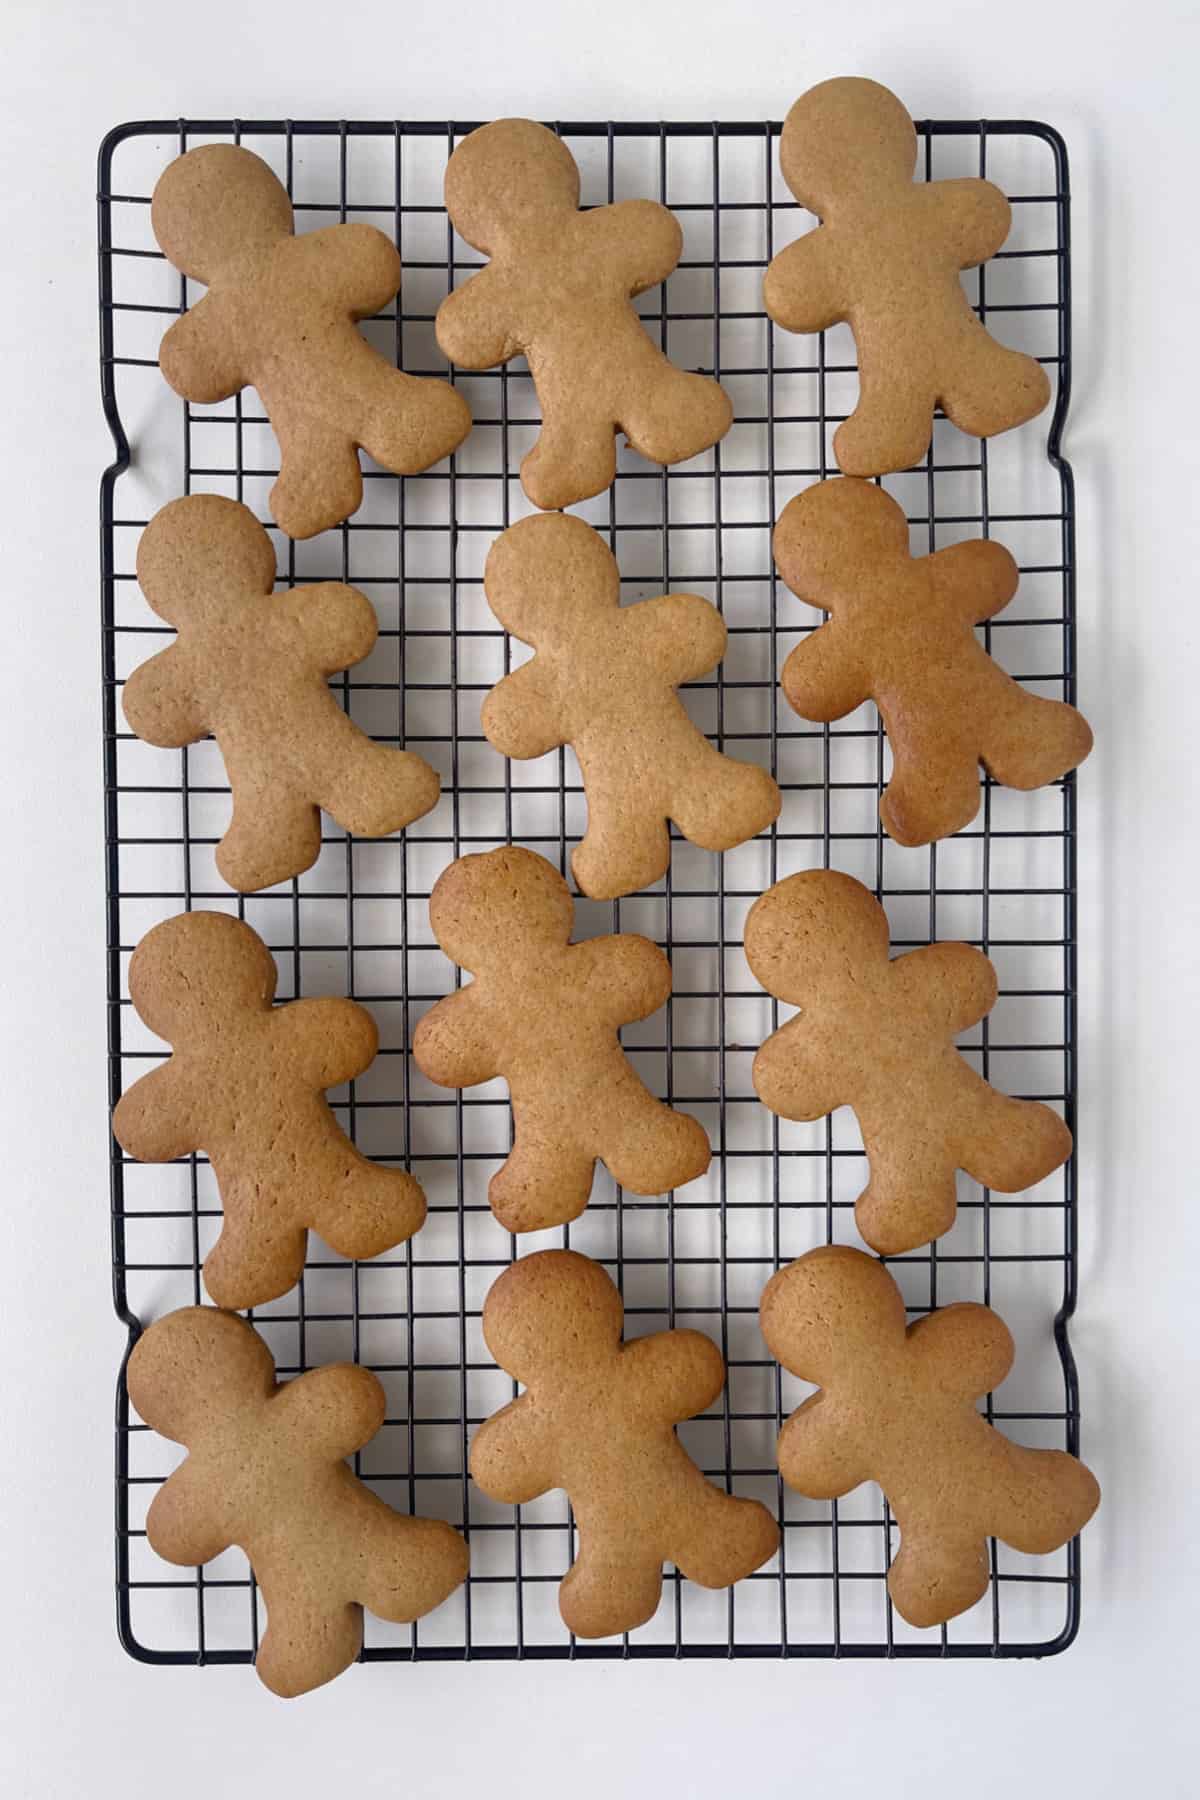 Baked gingerbread biscuits on a wire rack.